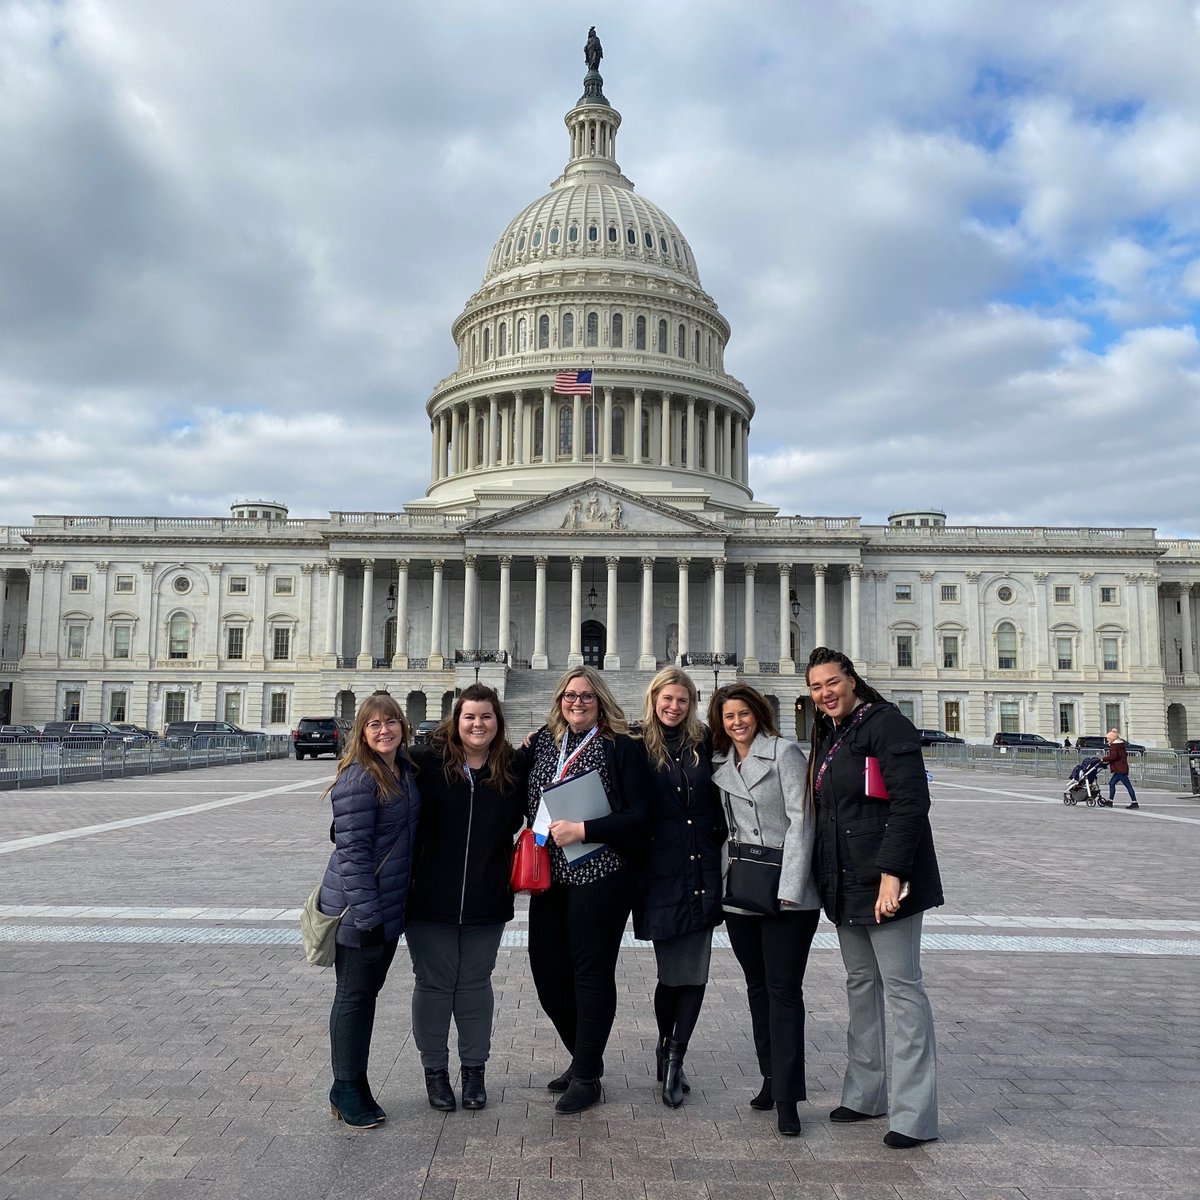 MENTOR Nebraska, @MentorTeamMates, and Kent Bellows Mentoring Program had a great time advocating for mentoring on Capitol Hill! Thank you to our friends at @SenatorFischer, @SenSasse, @RepDonBacon's offices for meeting with us yesterday! #MentoringMonth #CapitolHillDay